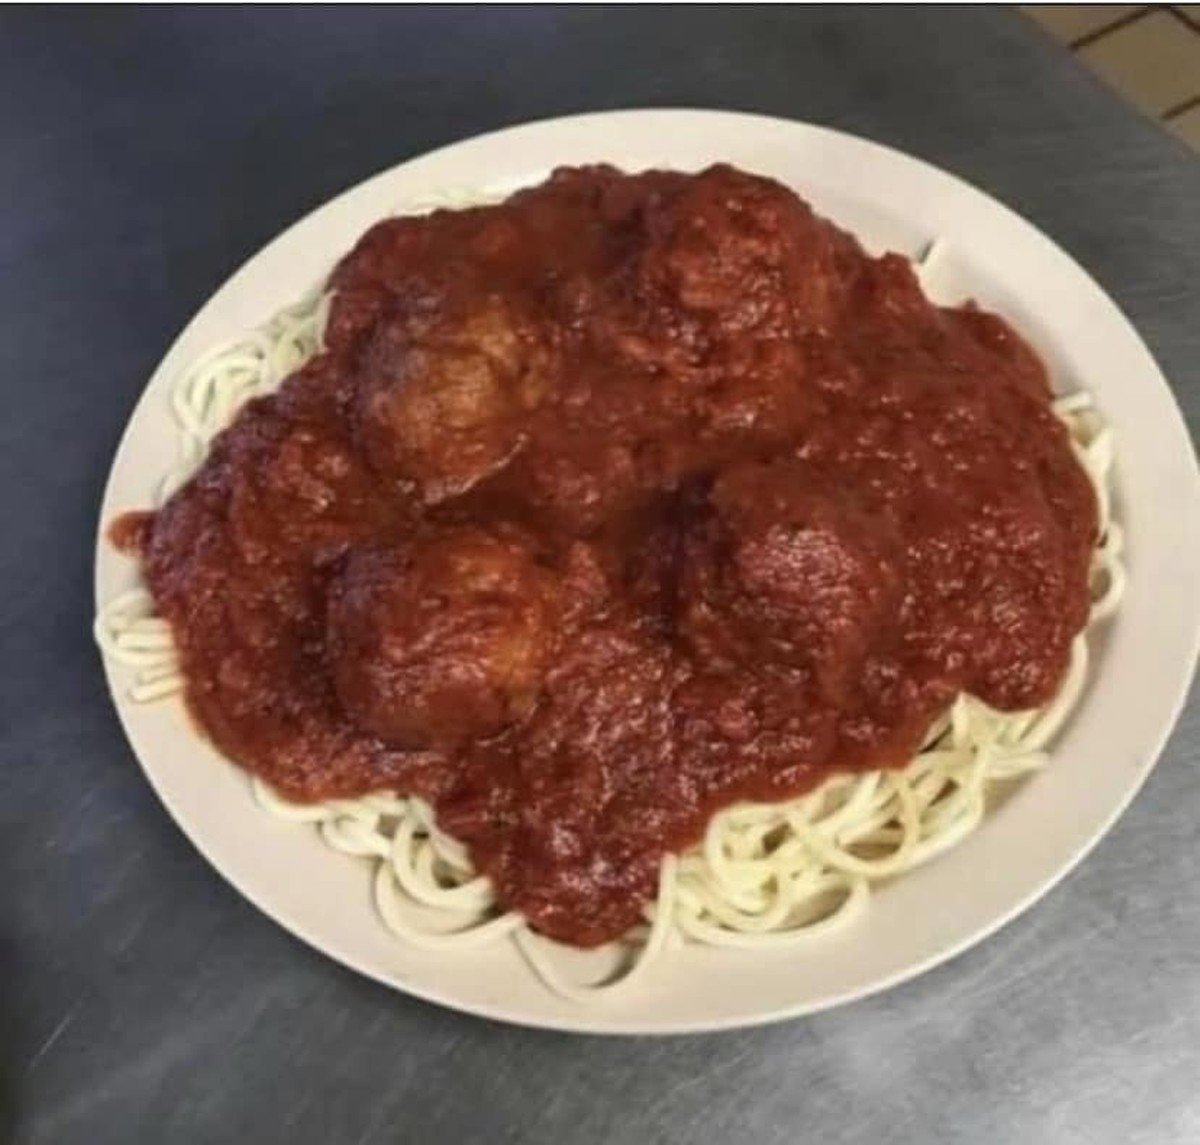 Spaghetti and meatballs, provided by Angilo's pizza Facebook page.